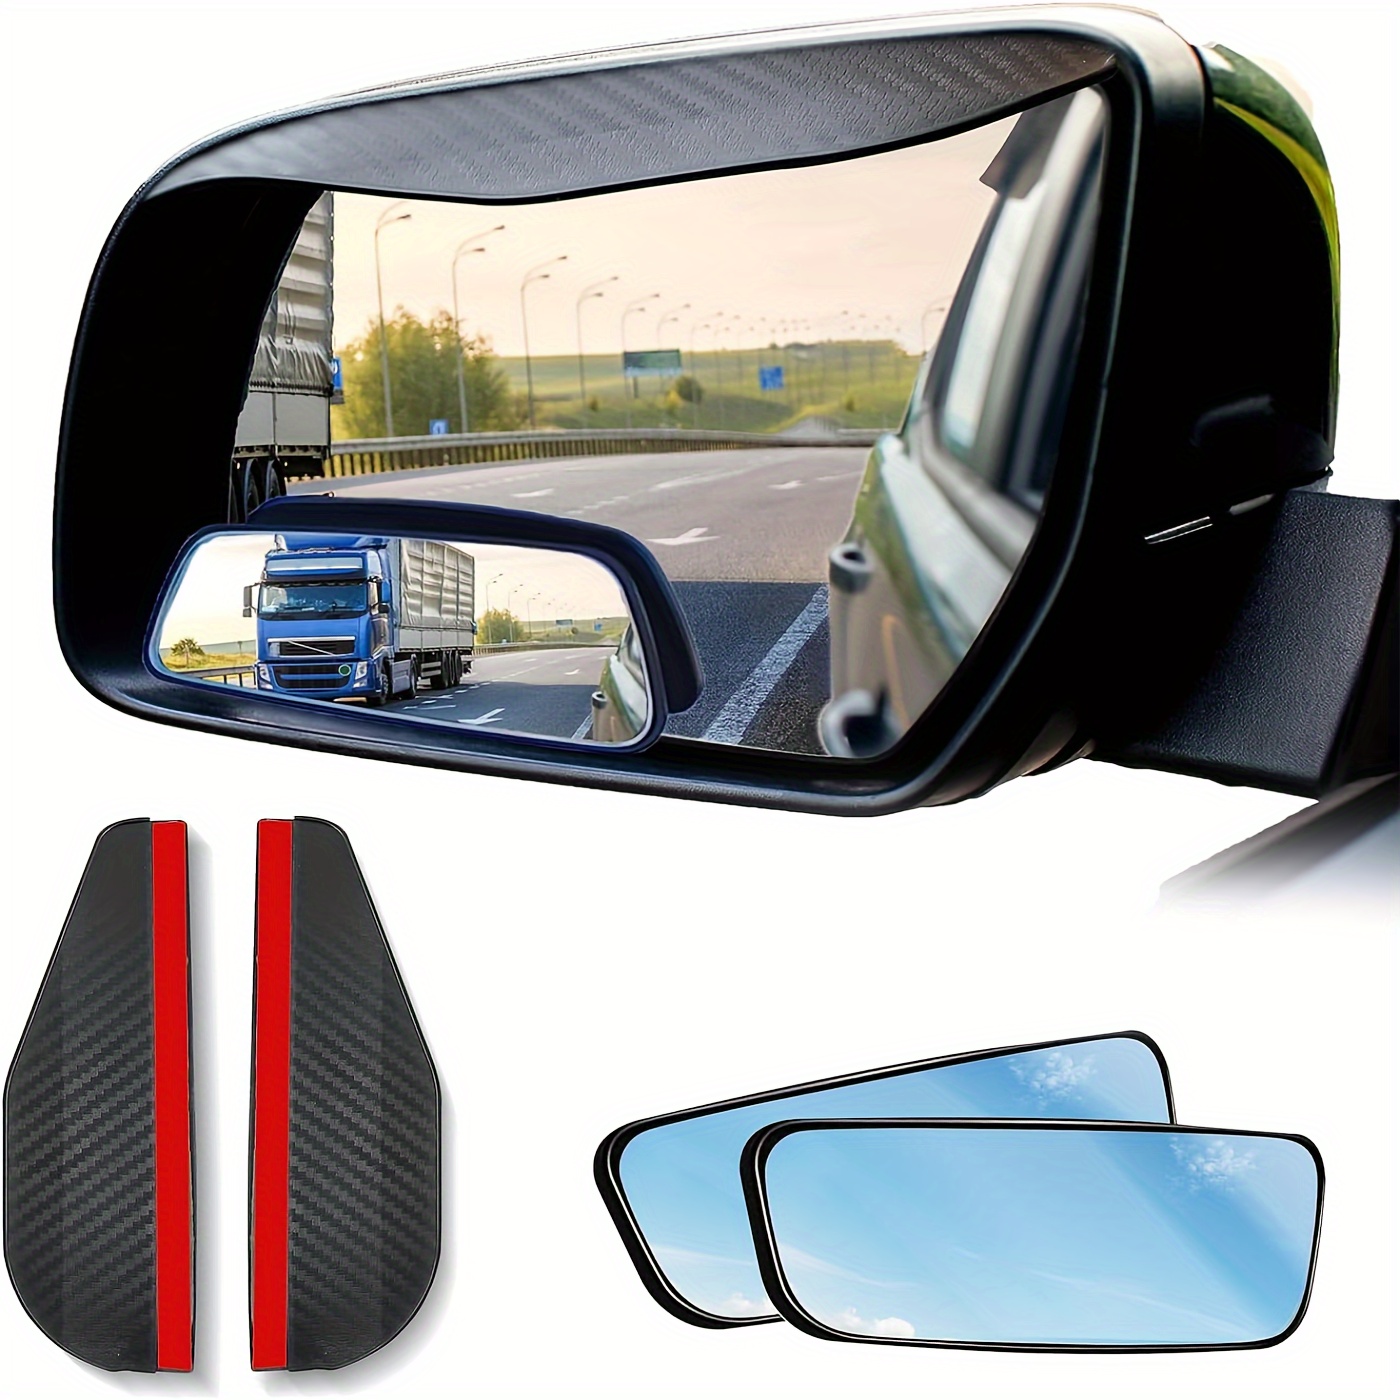 

4-piece Fit Wide Angle Car Rearview Mirrors With 3x View & Rain Covers - Adjustable Blind Spot Side Mirrors For Cars, Suvs, Trucks